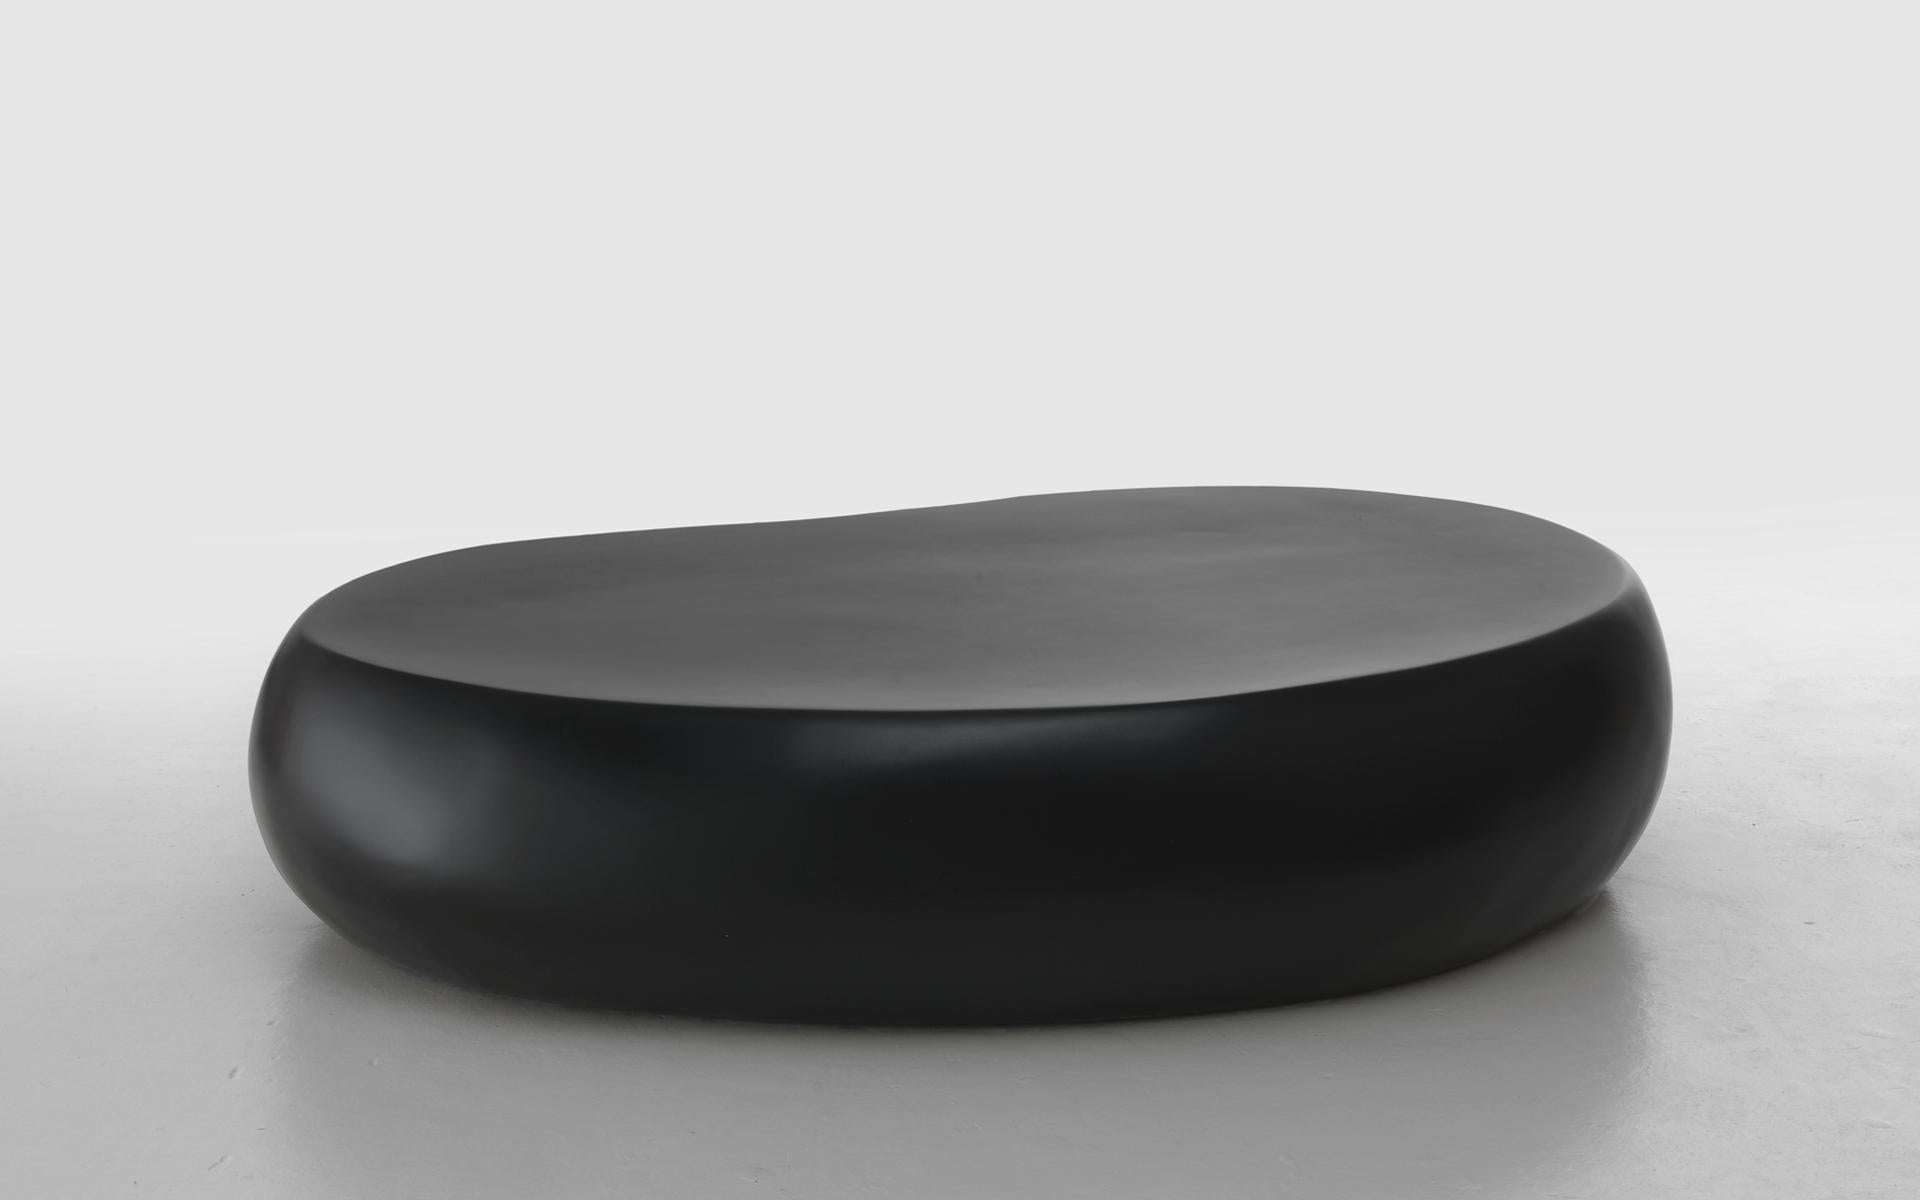 Slab coffee table by Imperfettolab
2011
Dimensions: 131 x 83 x H 30
Materials: Fibreglass
Available in black and white.

Seat/Coffee table in fibreglass.

Imperfetto Lab
Who we are ? We are a family.
Verter Turroni, Emanuela Ravelli and